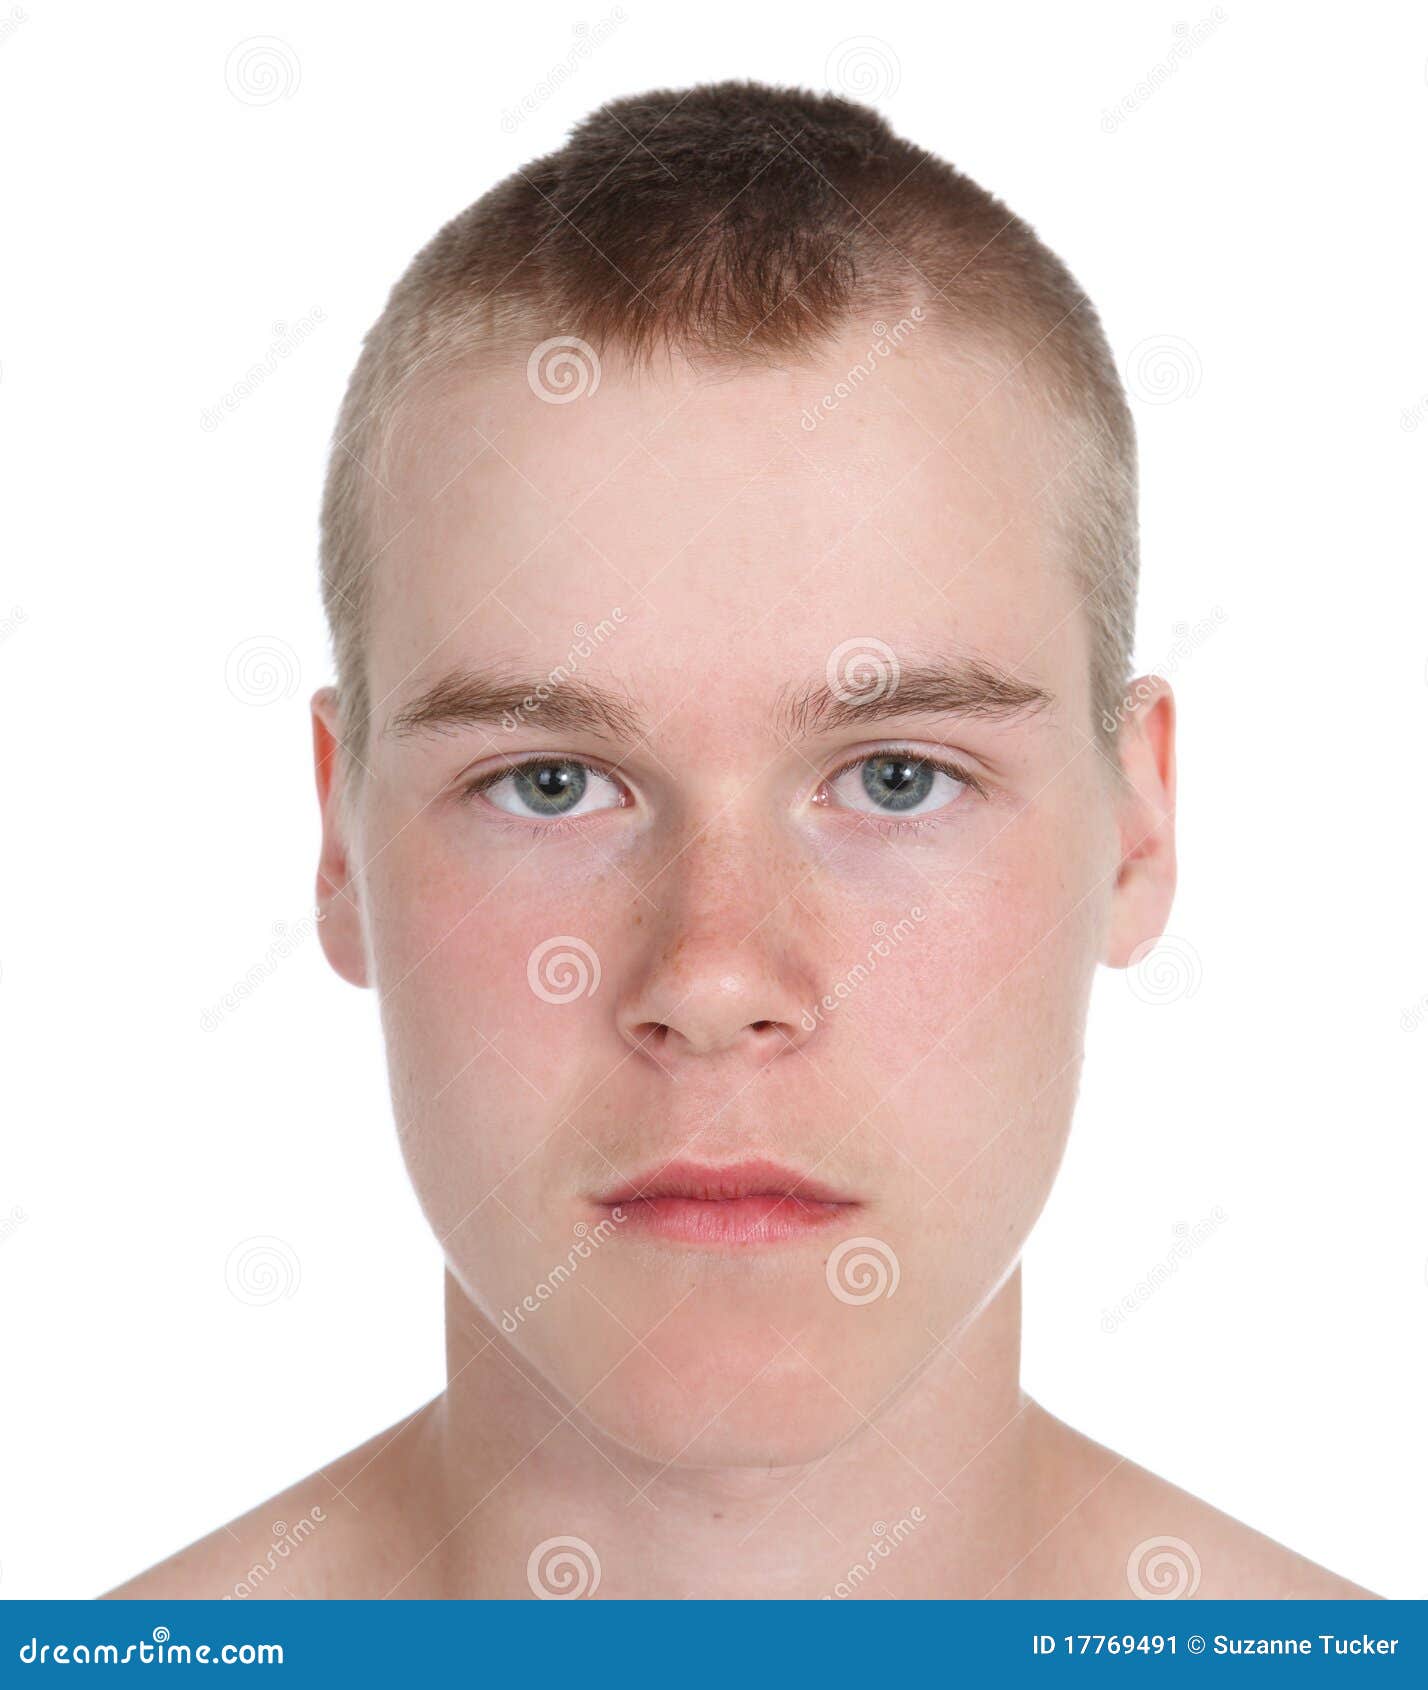 Teenage Boy with a Mohawk Hairstyle Stock Image - Image of face, person:  17769491